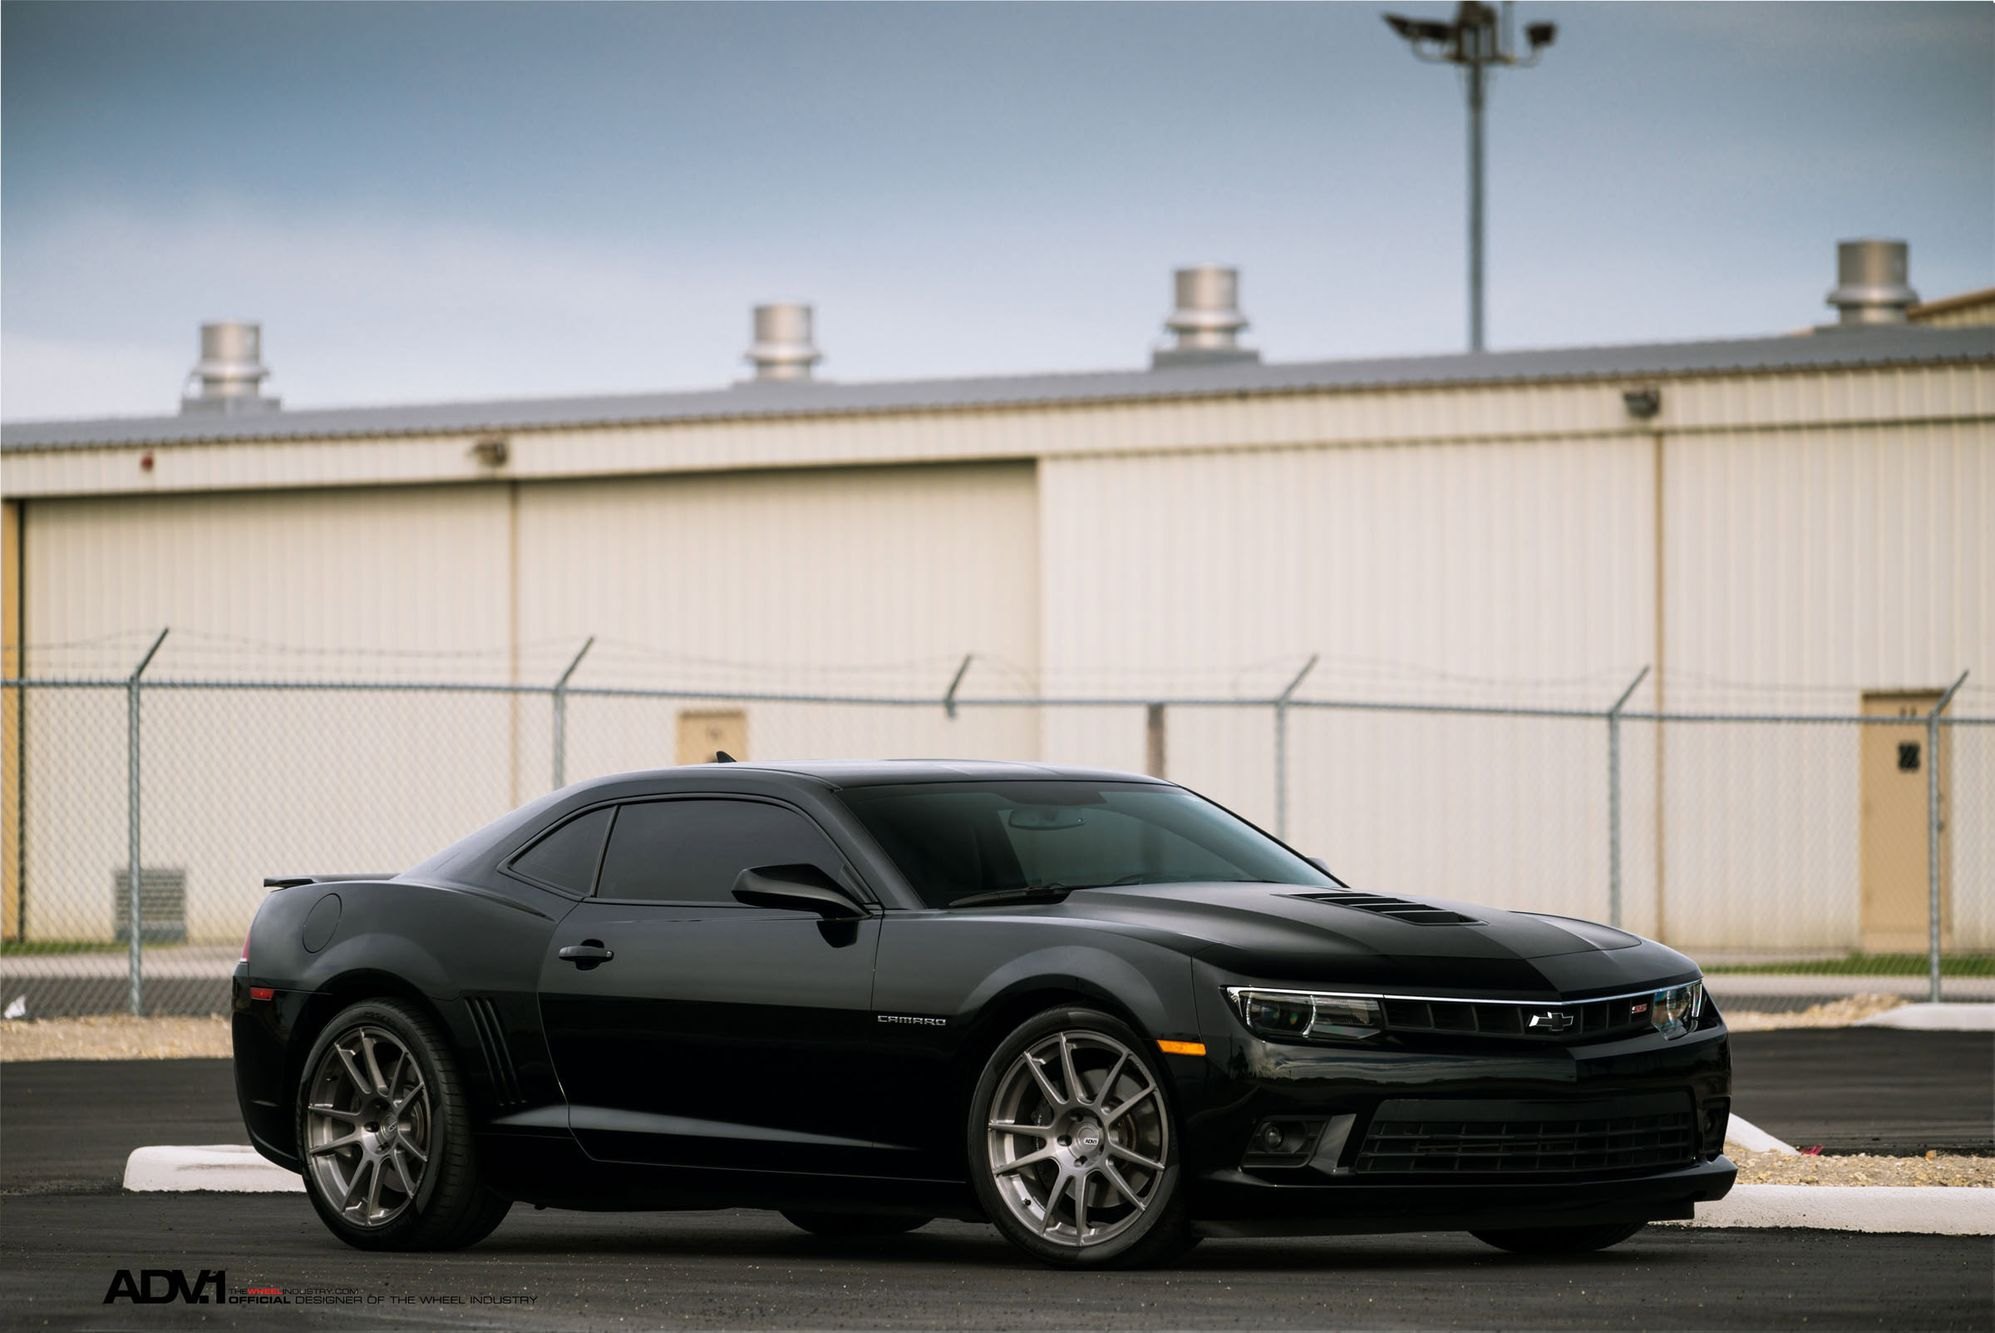 Black Chevy Camaro SS with Aftermarket Side Skirts - Photo by ADV.1